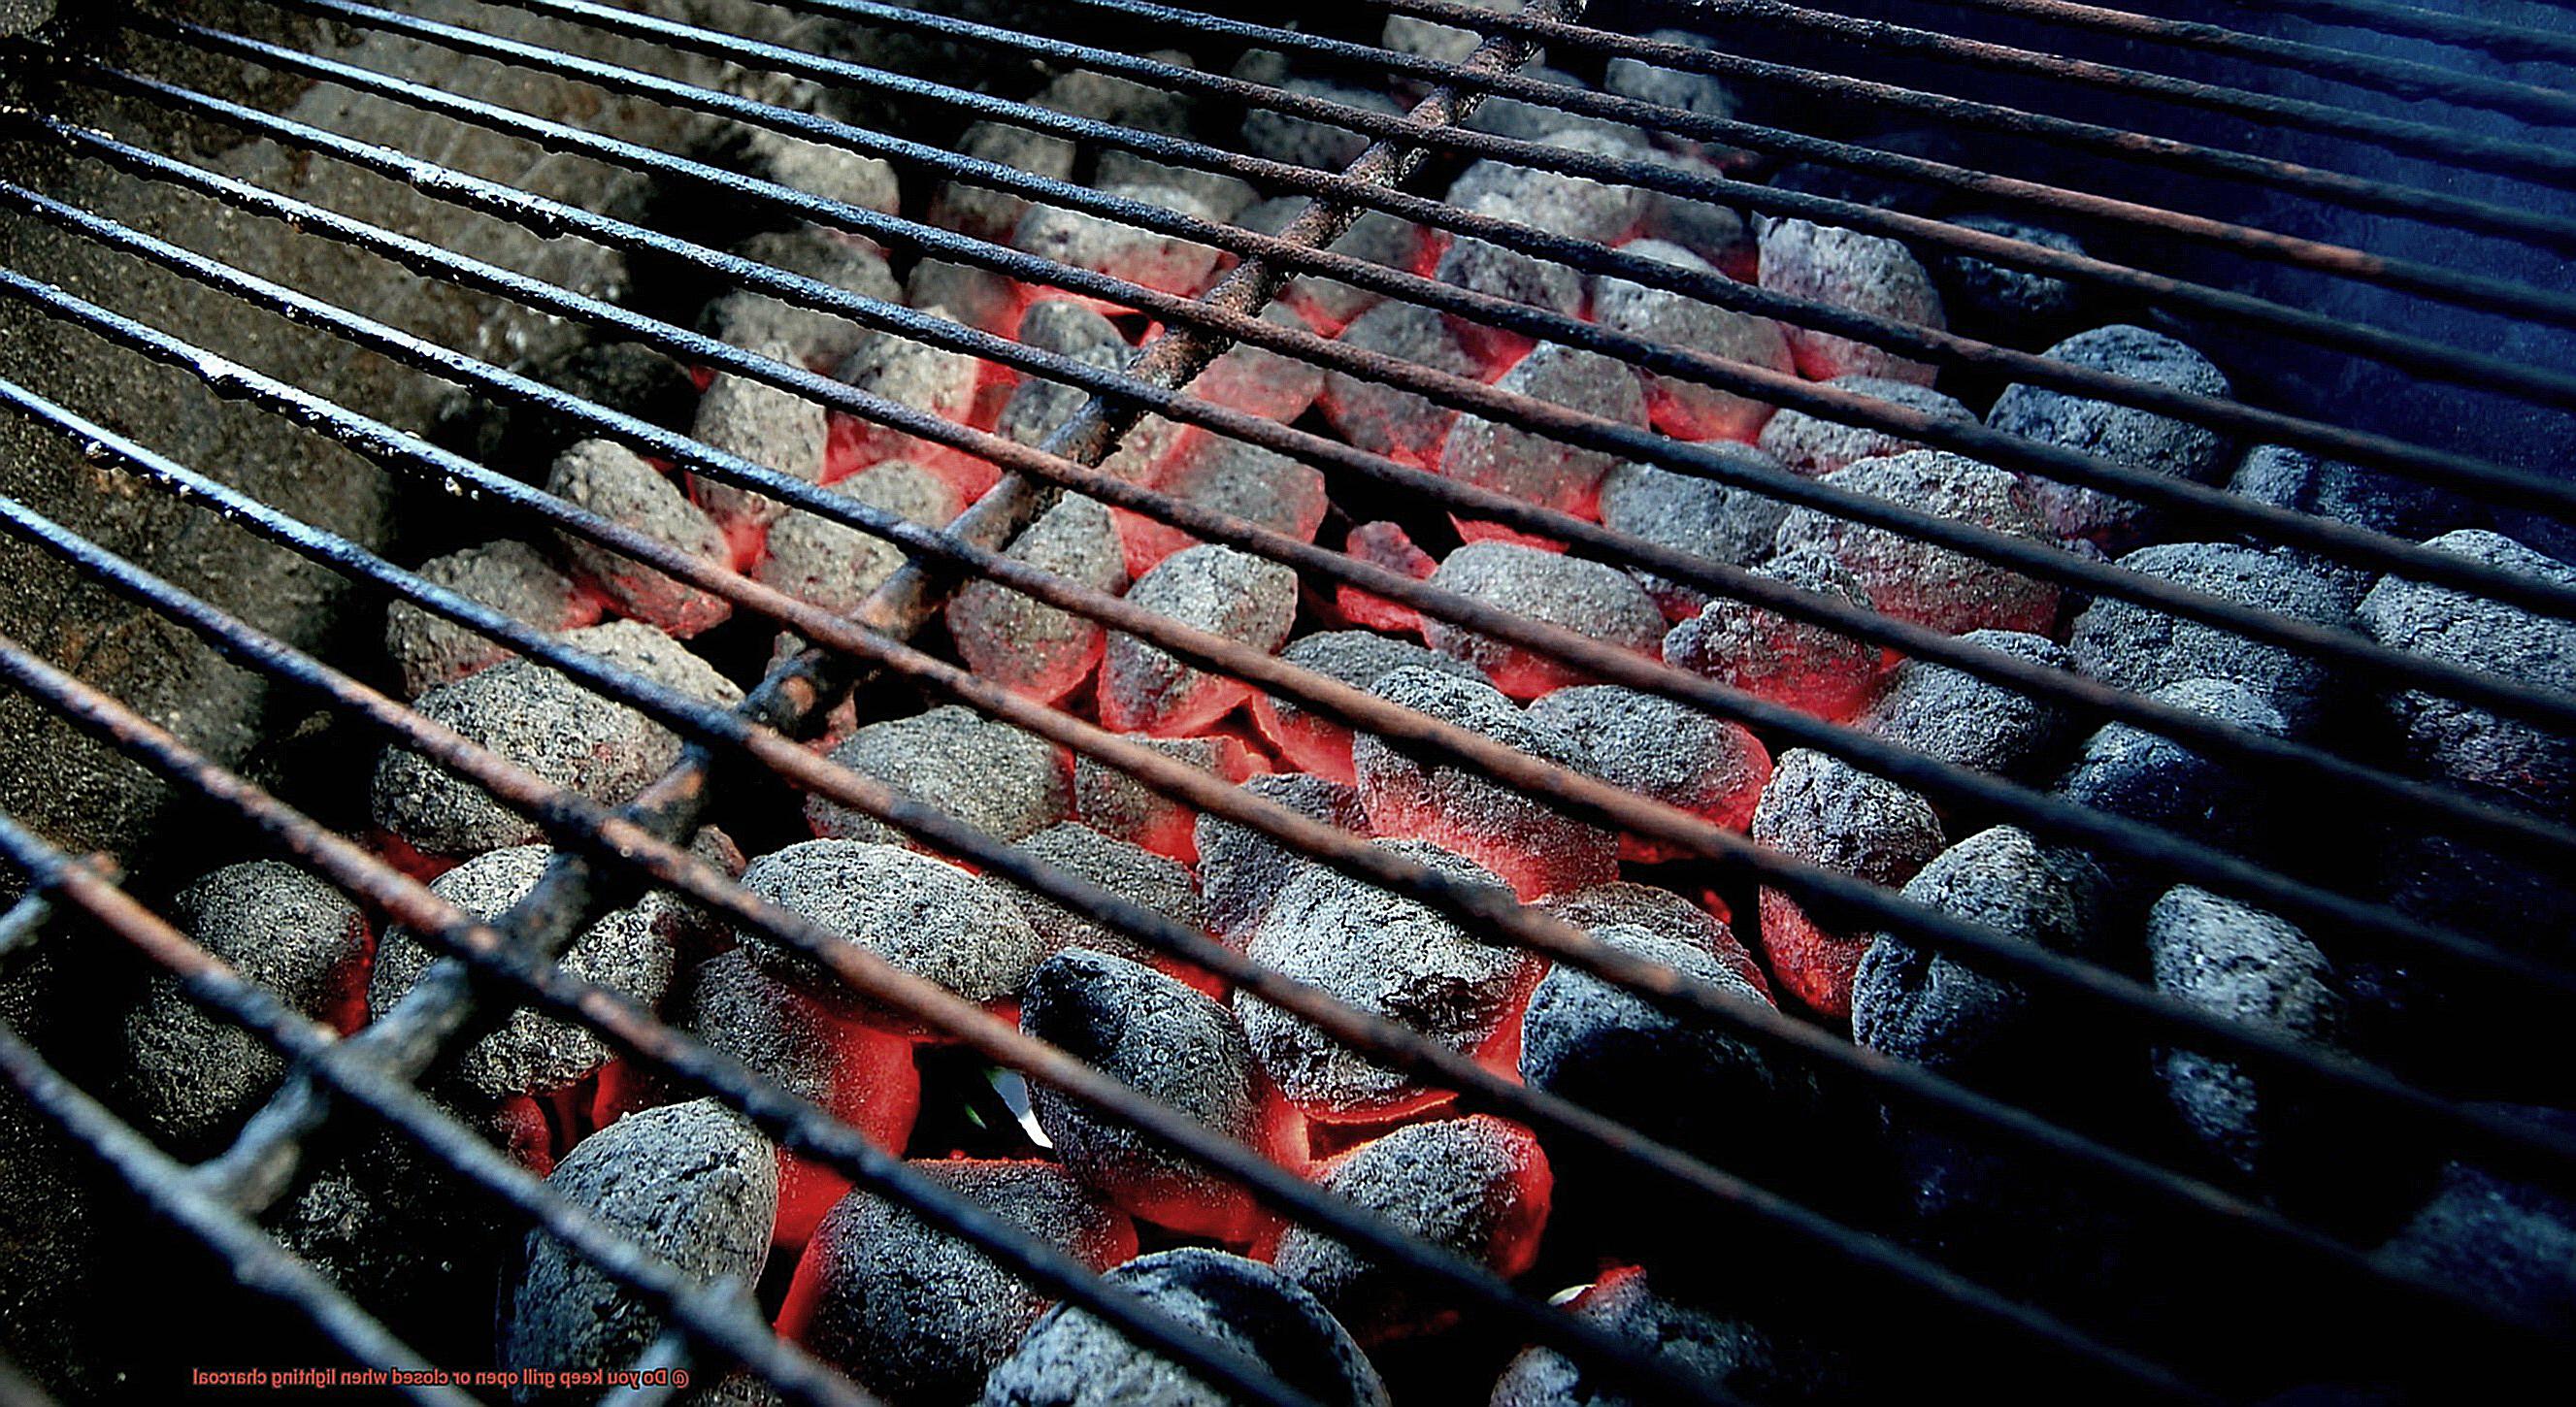 Do you keep grill open or closed when lighting charcoal-4